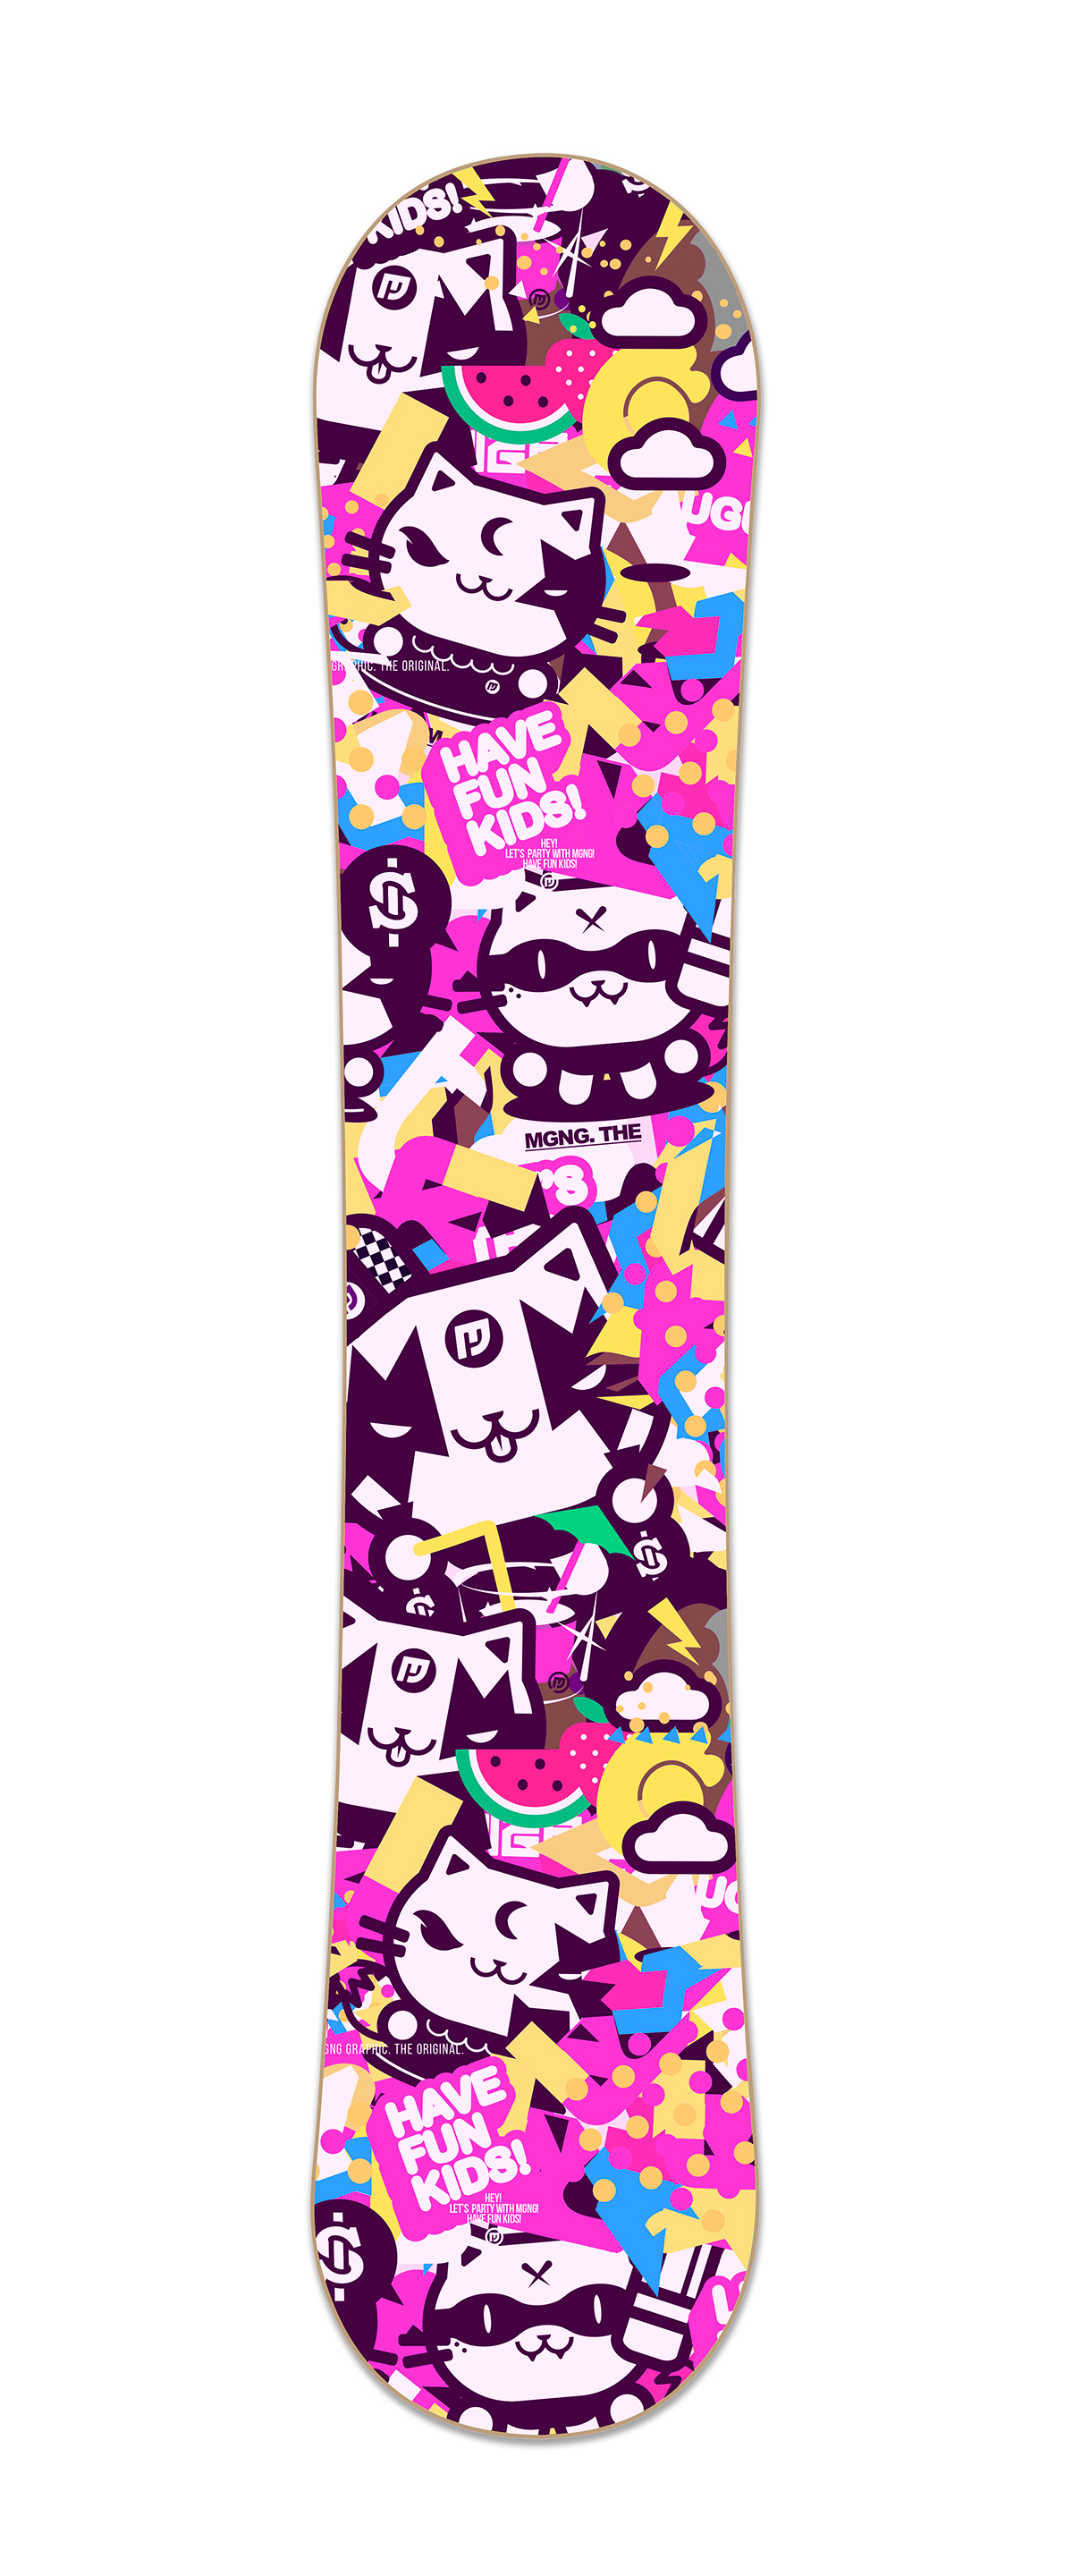 cool cats mgng design japanese costume Let's Party rock Punkstar characters kawaii Snowboards